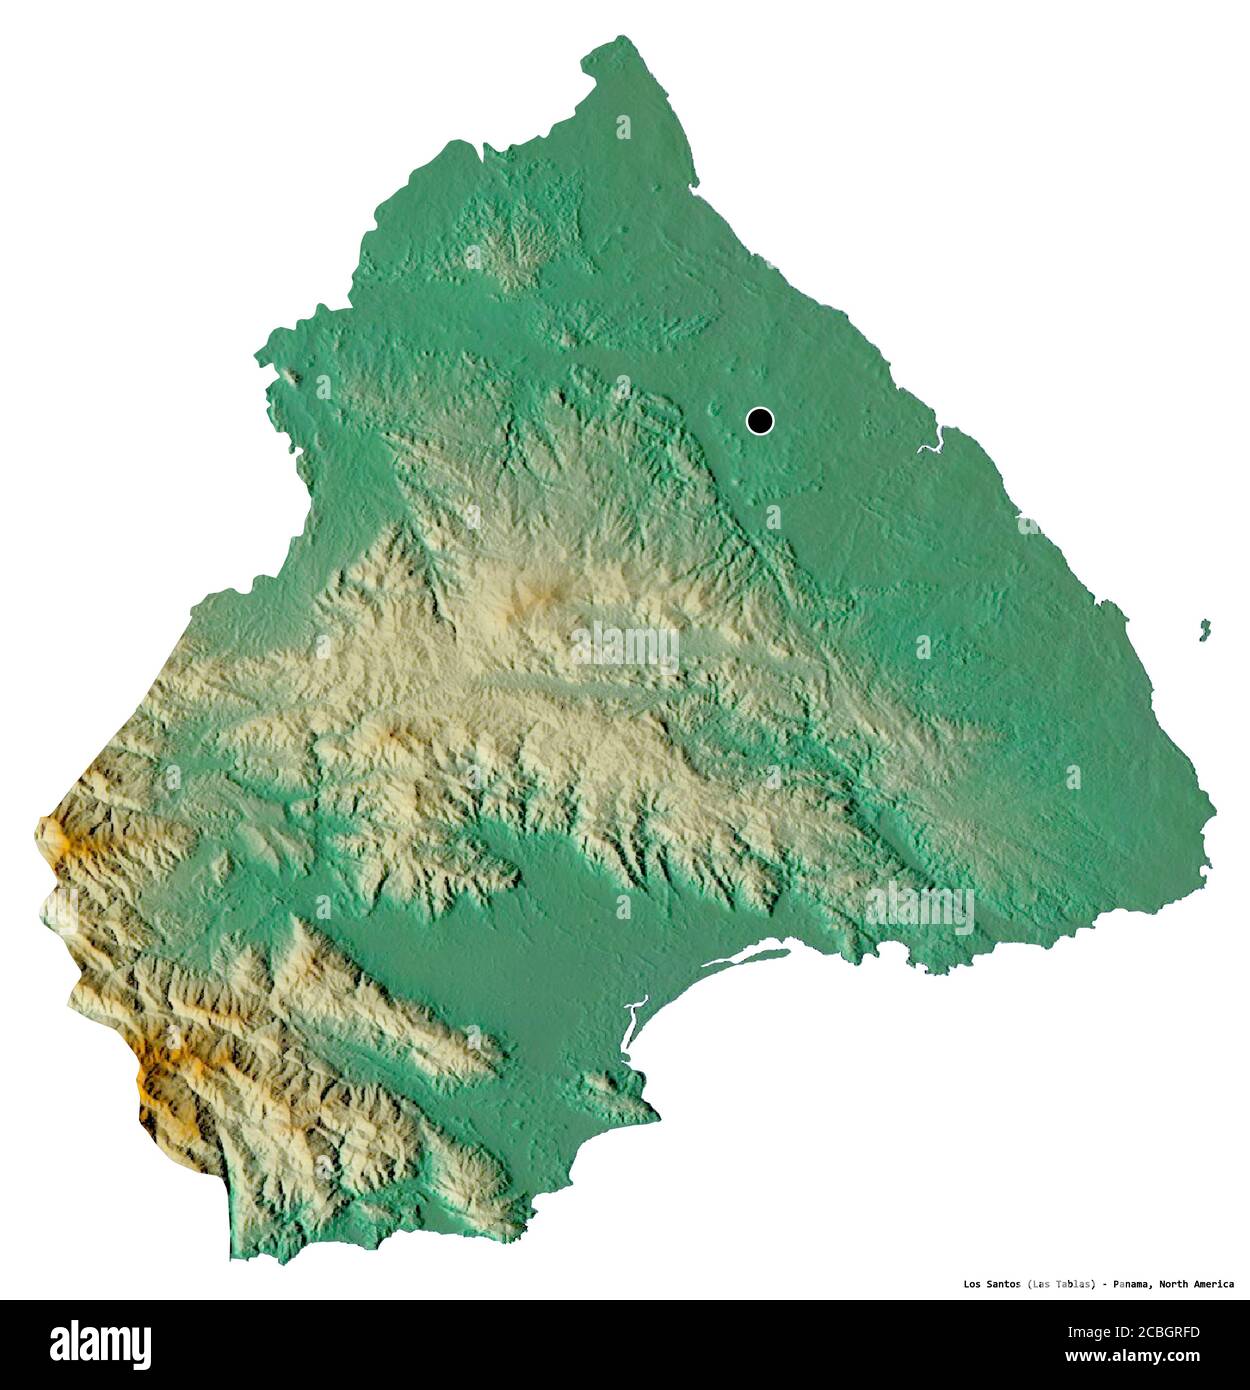 Shape of Los Santos, province of Panama, with its capital isolated on white background. Topographic relief map. 3D rendering Stock Photo